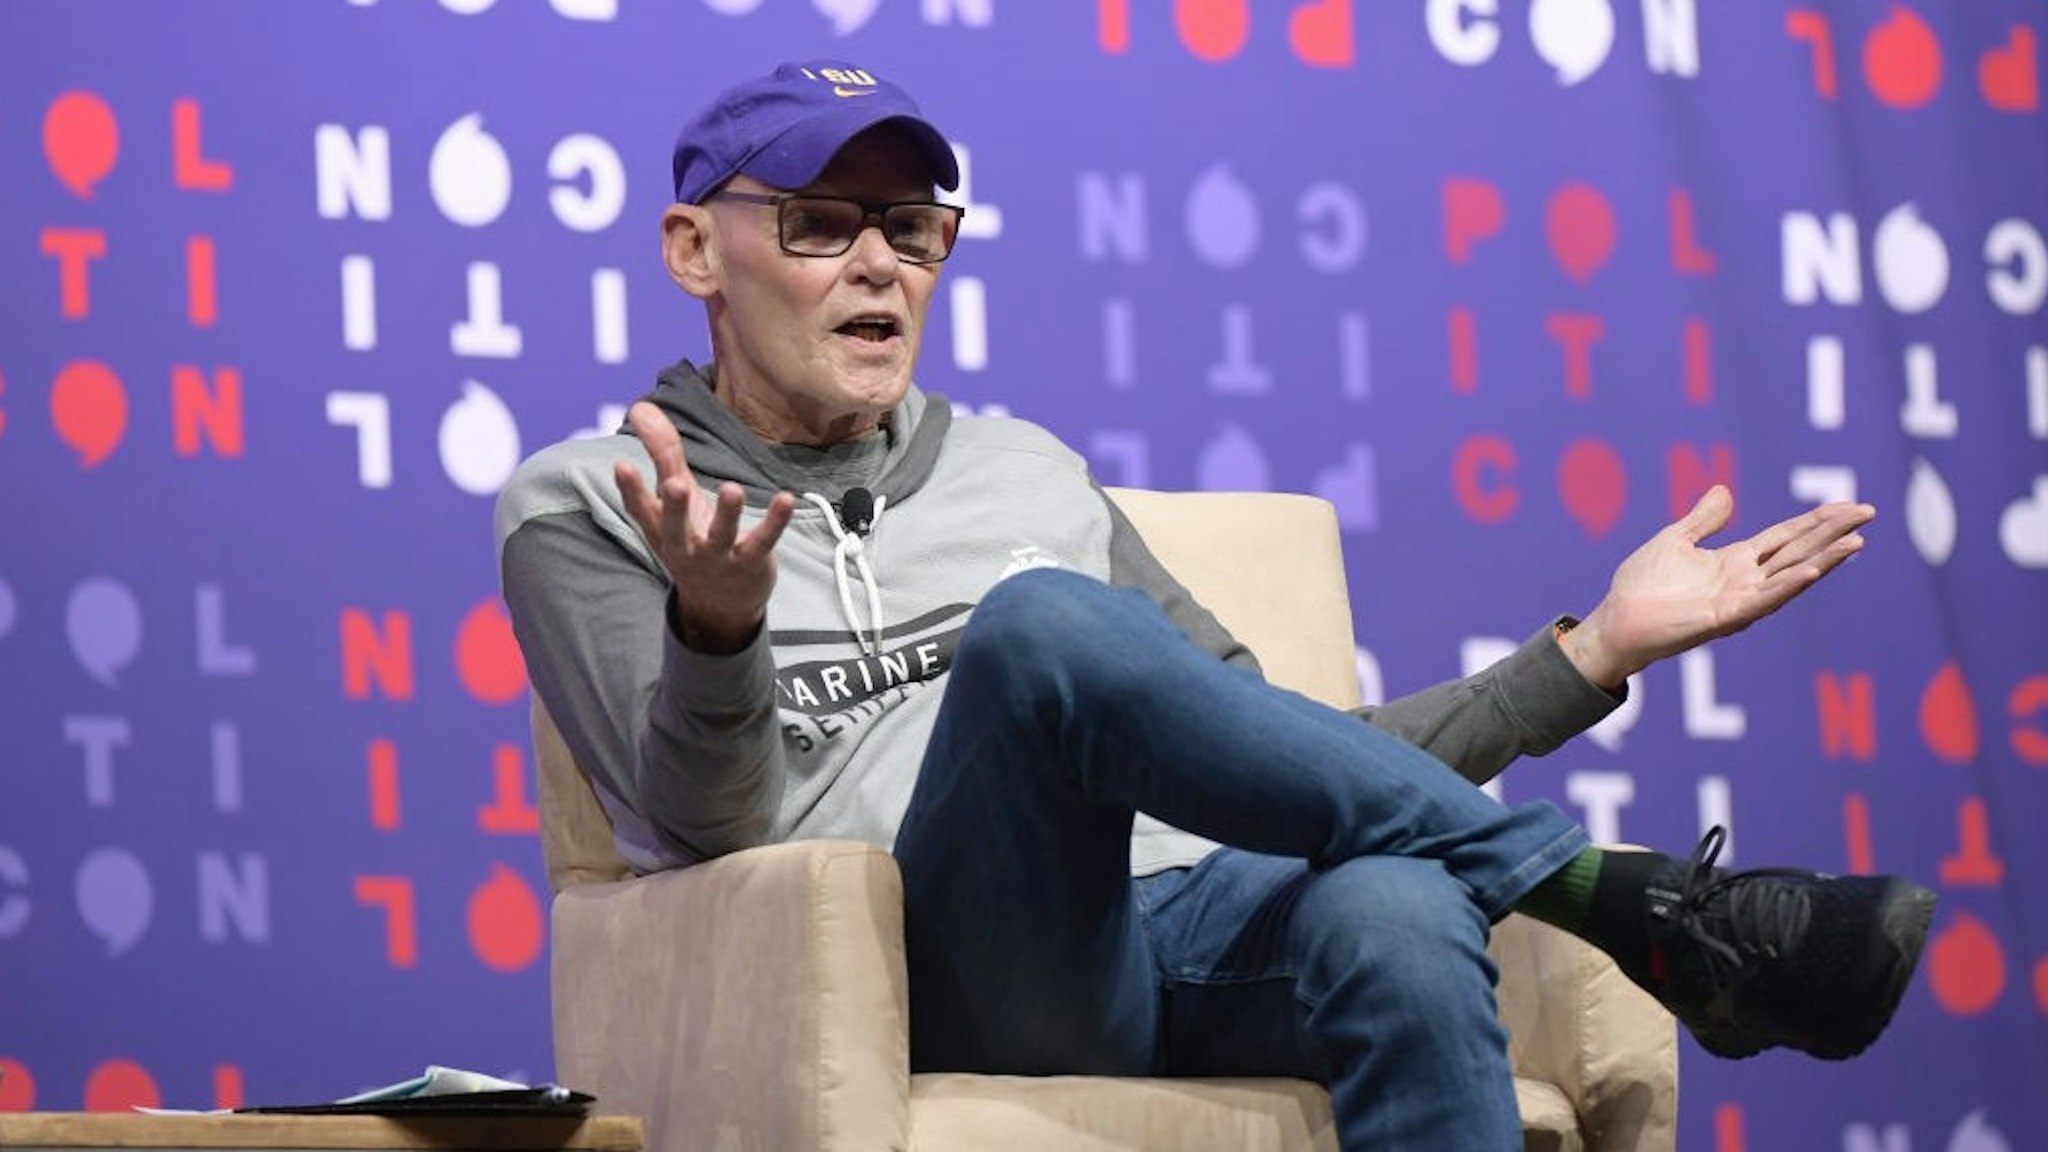 NASHVILLE, TENNESSEE - OCTOBER 26: James Carville speaks onstage during the 2019 Politicon at Music City Center on October 26, 2019 in Nashville, Tennessee. (Photo by